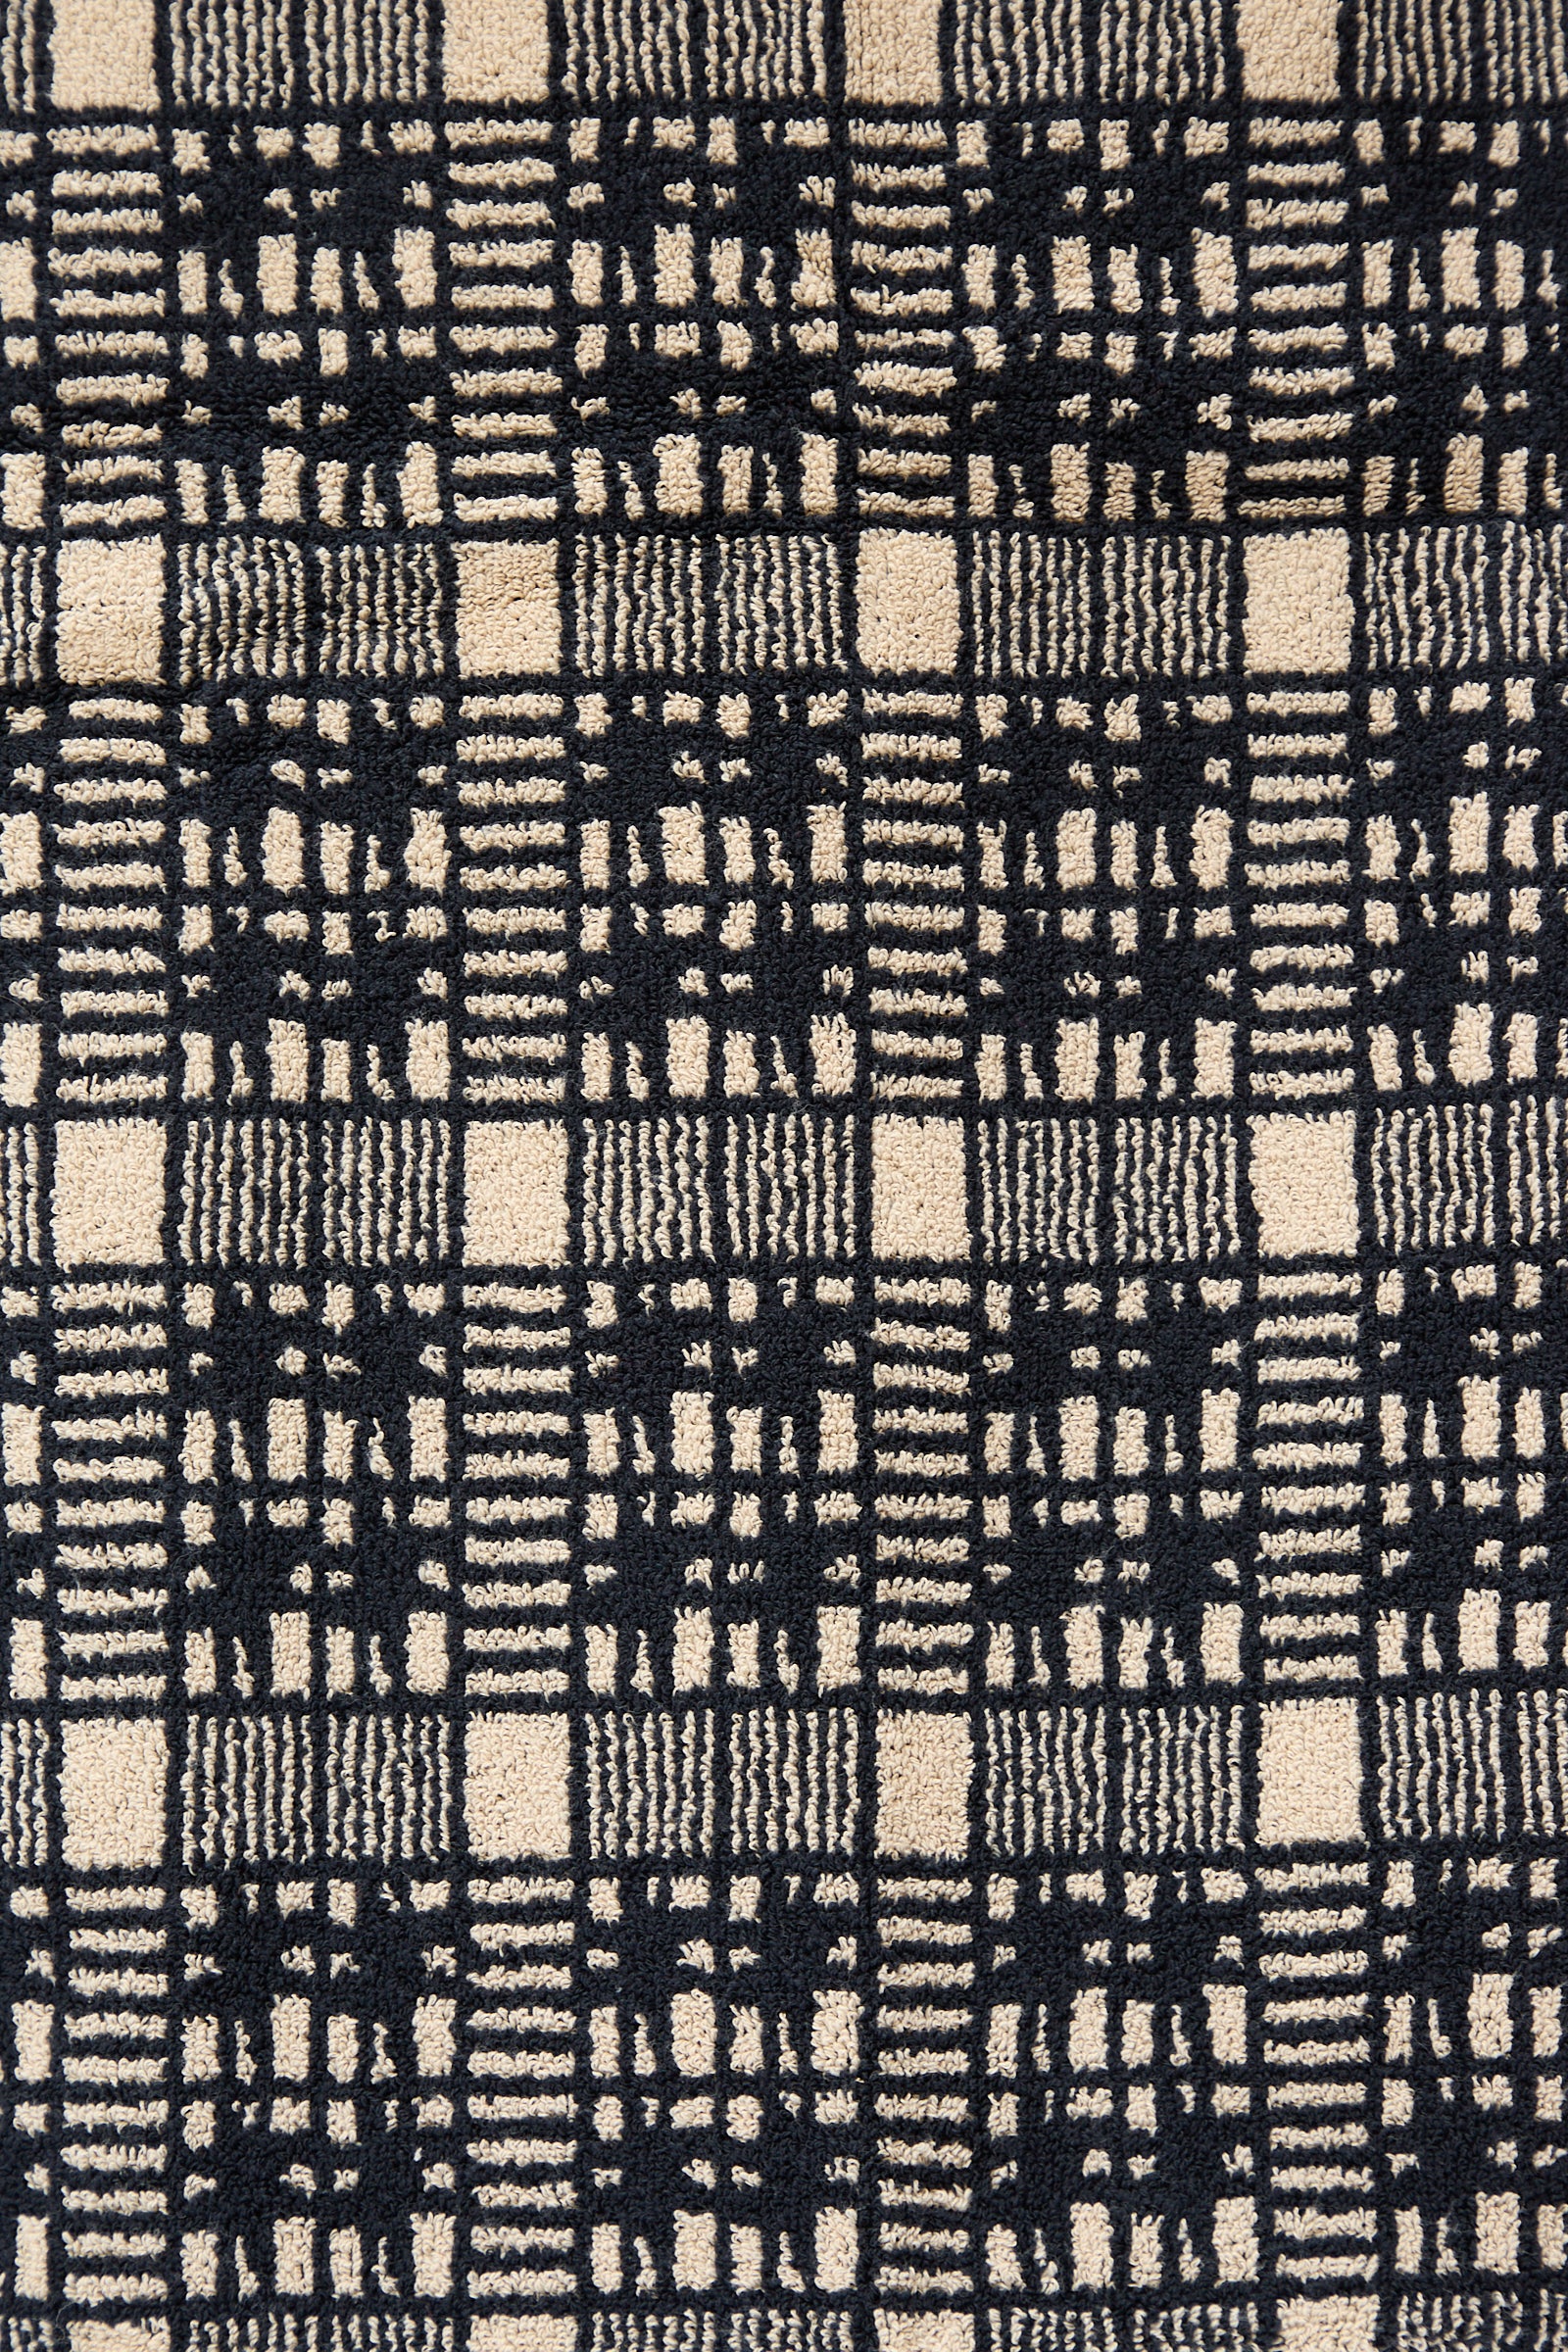 Close-up view of an Autumn Sonata Alma Bath Towel with a black and white checkered pattern, made in Portugal.